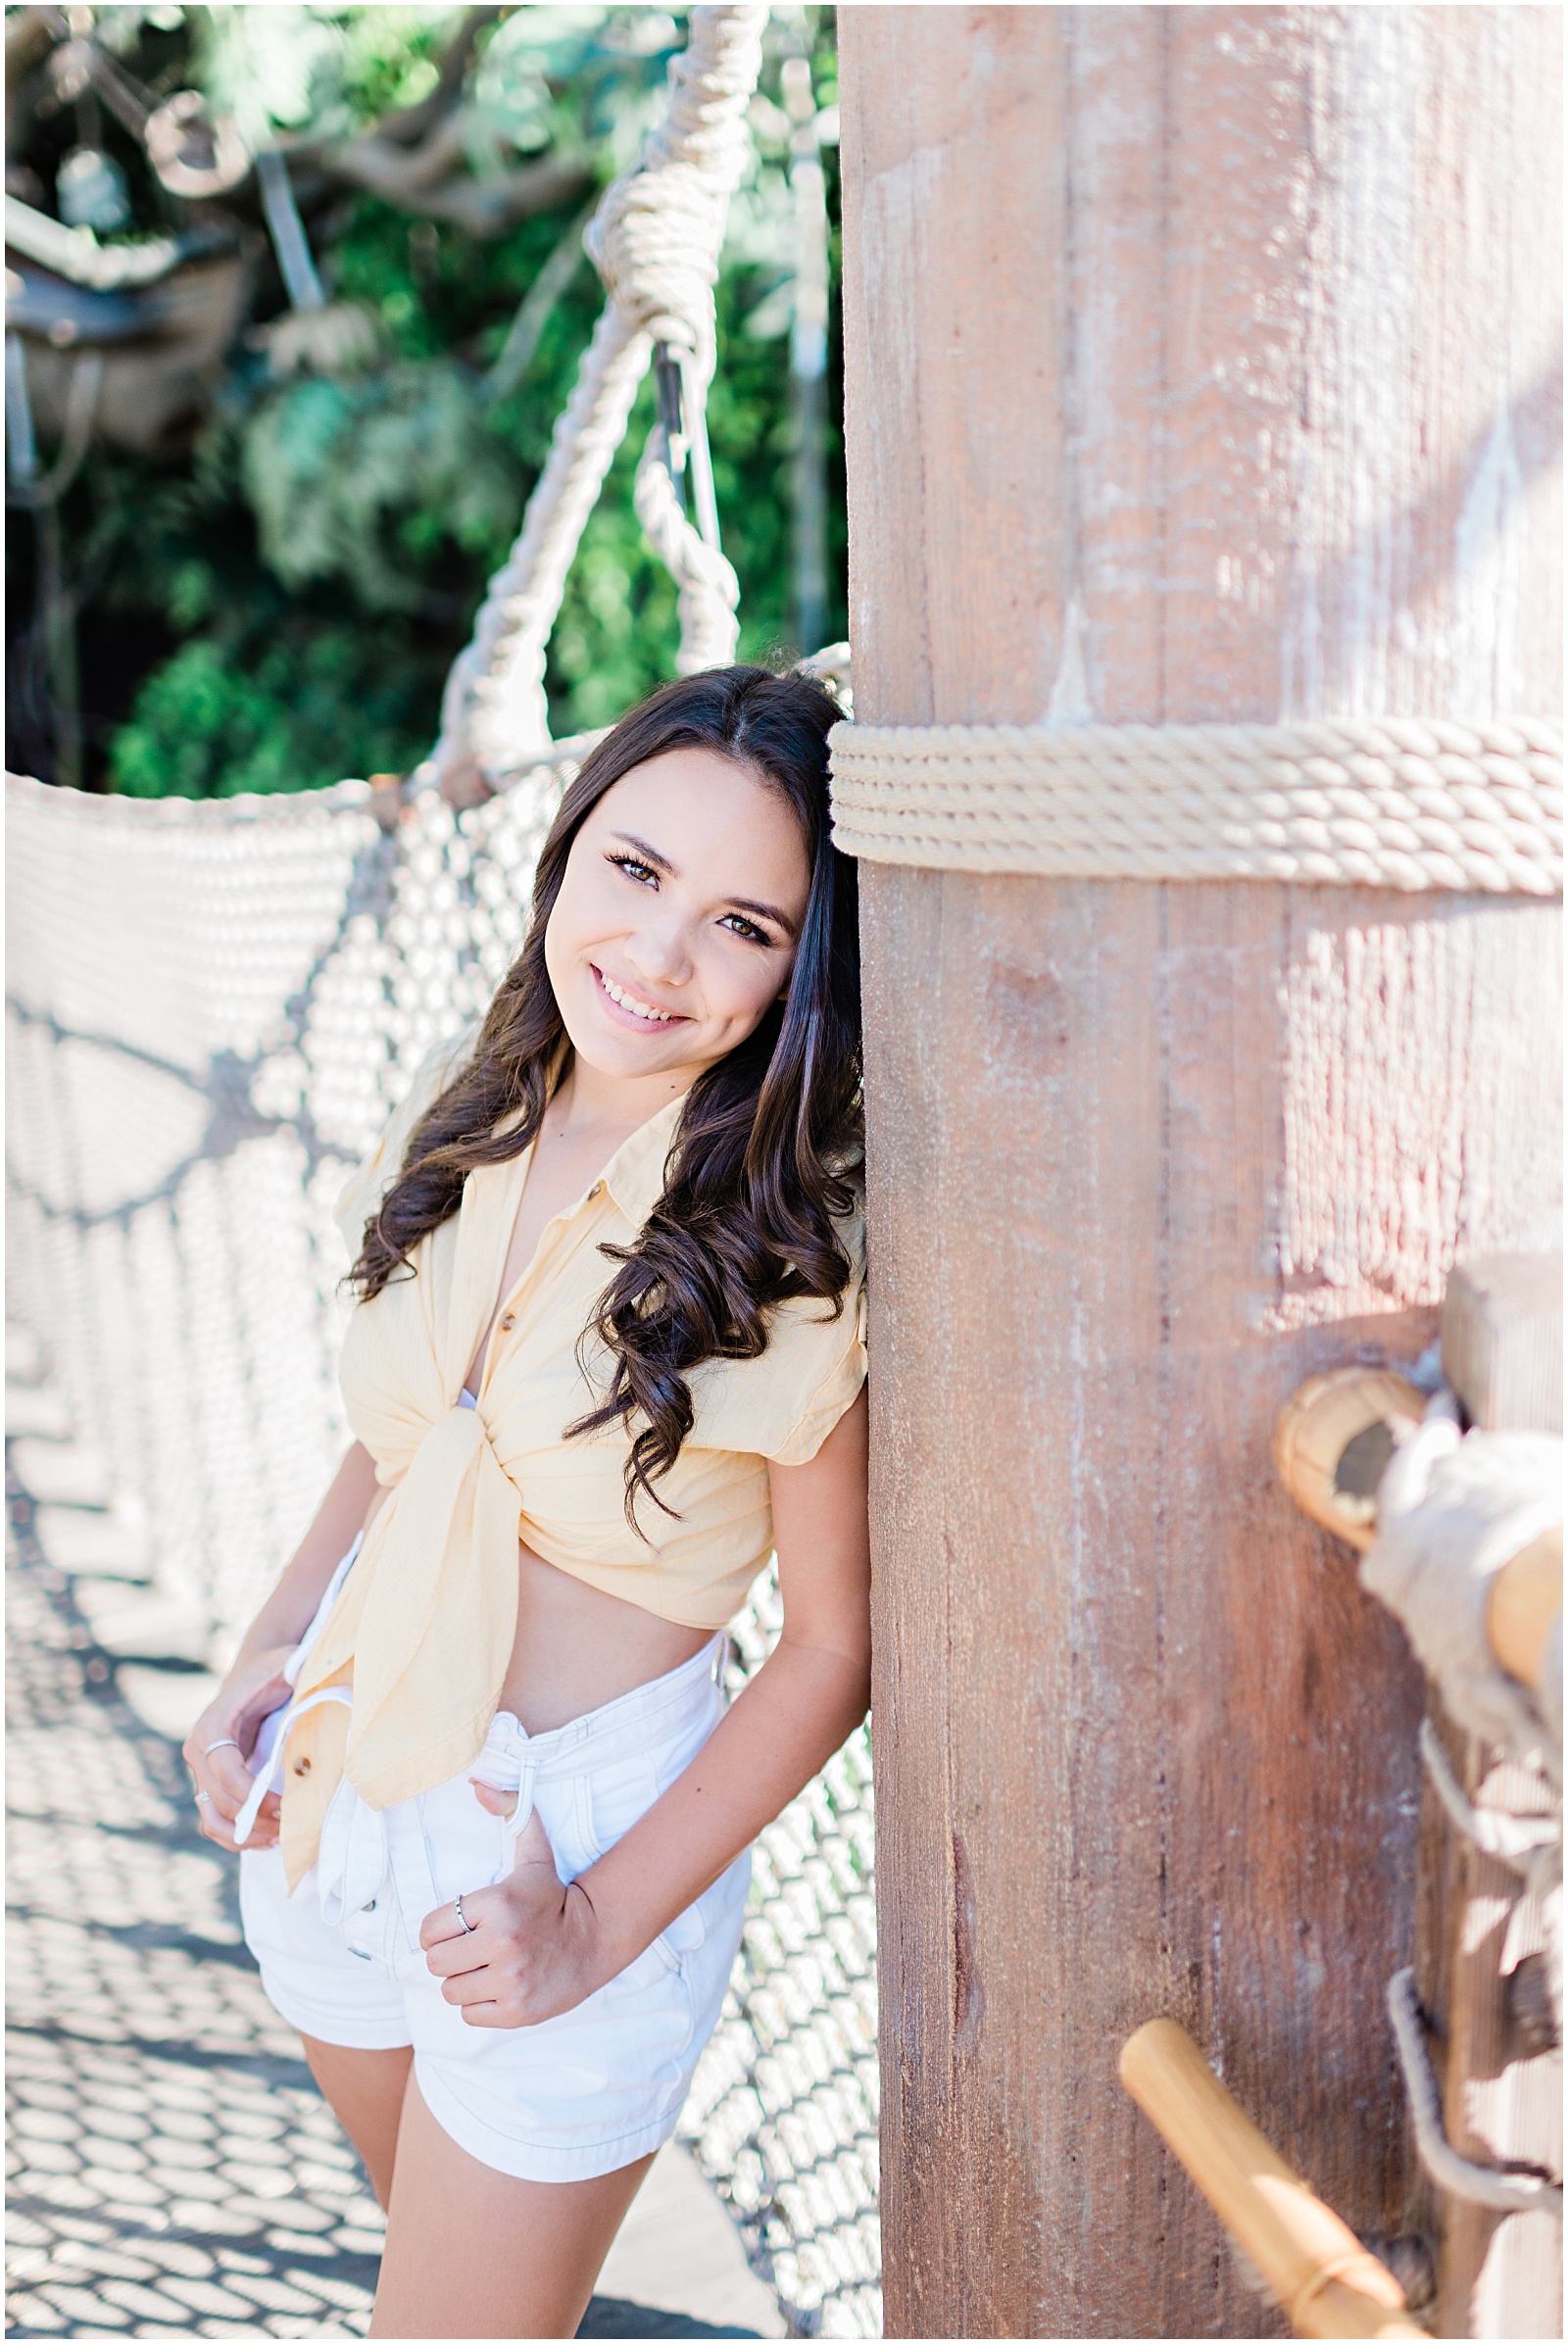 Disneyland Tarzan's Treehouse Senior Session. Images by Mollie Jane Photography. To see more go to www.molliejanephotography.com.